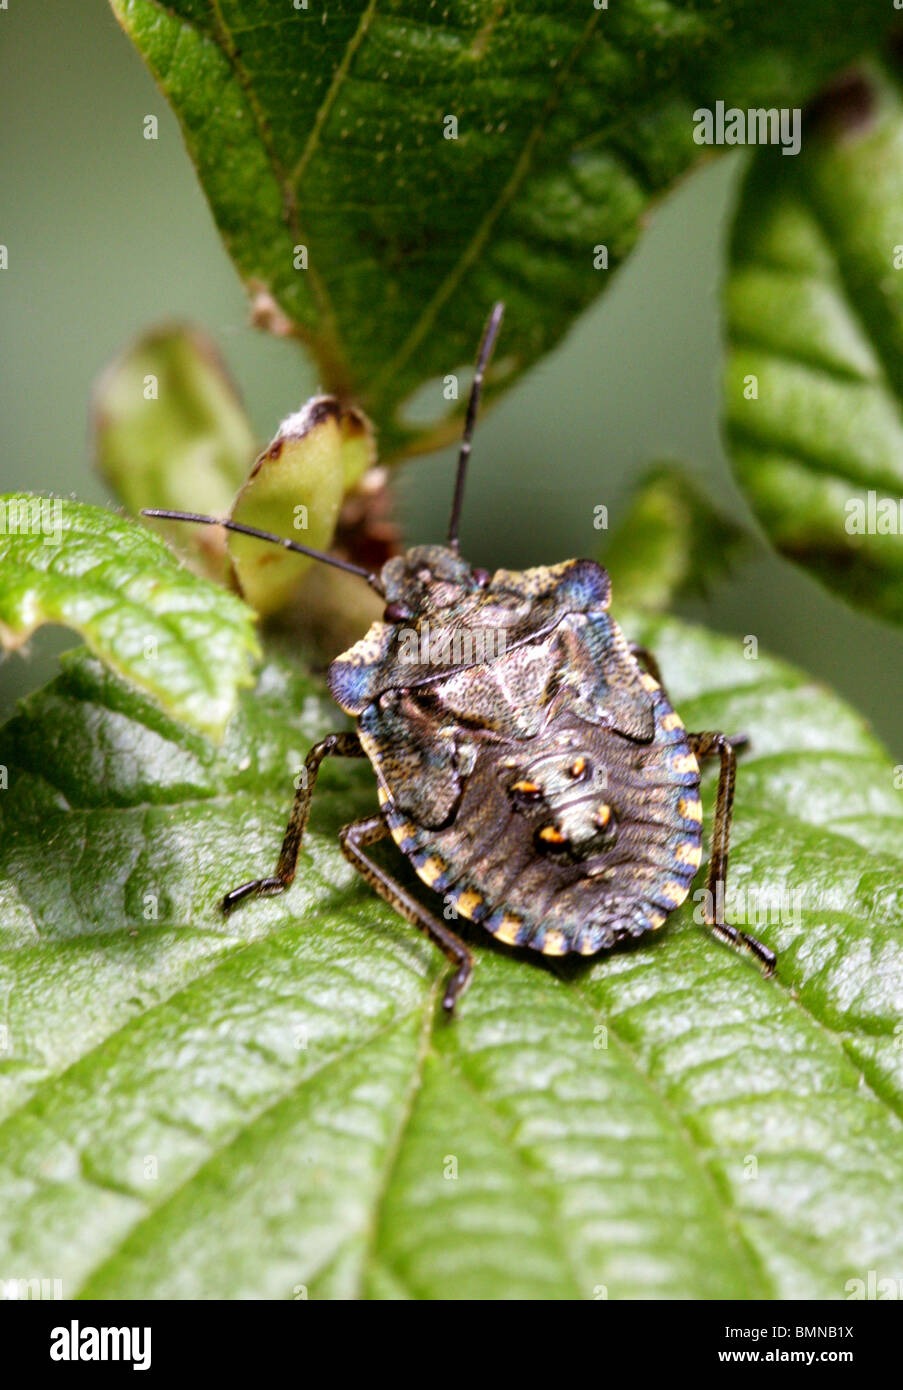 Forest Shieldbug, Final Instar of Pentatoma rufipes, Pentatomidae, Hemiptera. Last nymph stage before becoming an adult insect. Stock Photo